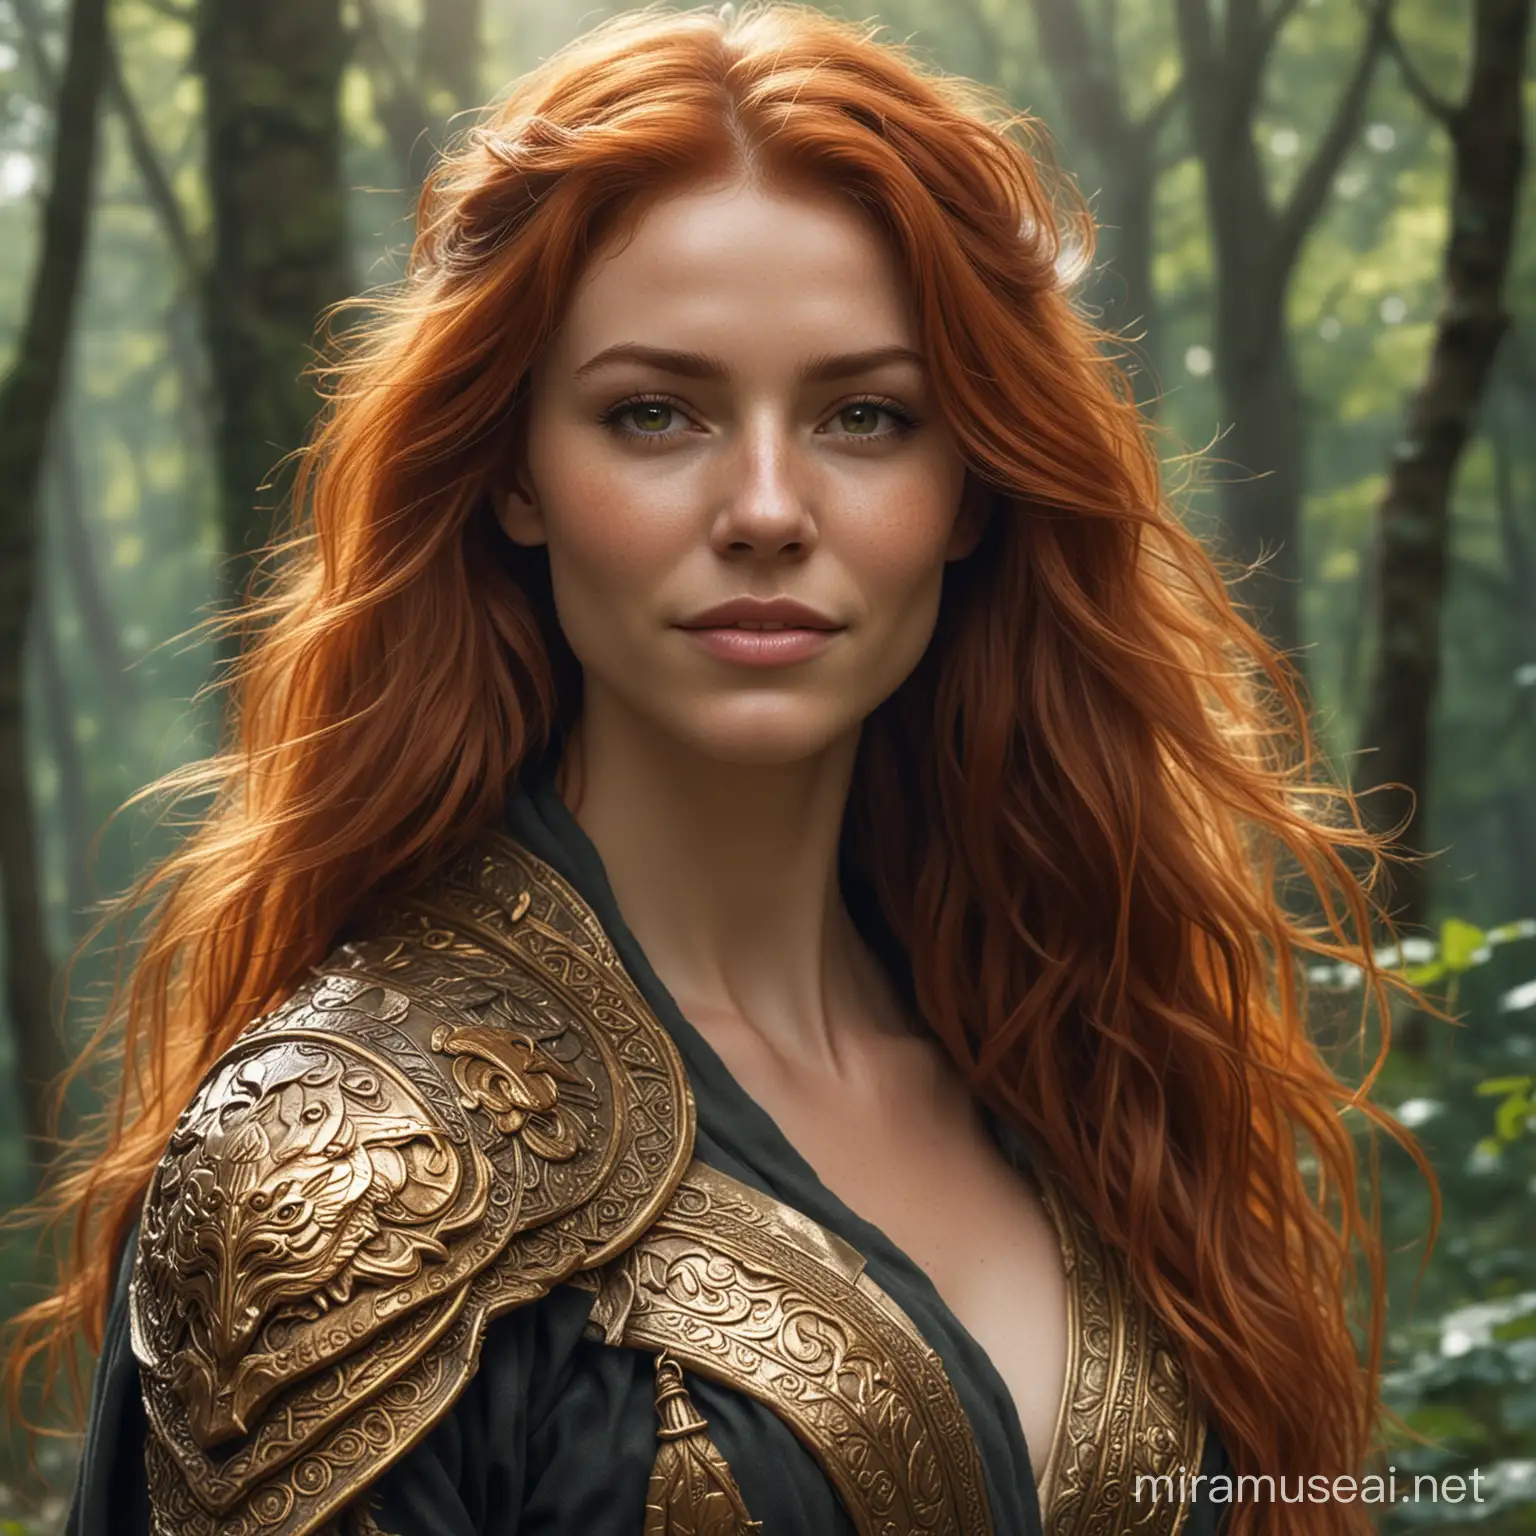 Create a beautiful, ultra-realistic image of a gorgeous redhead with long and beautiful hair, dressed as a warrior, with clothes with old gold accents. She's half lion and half woman, like in a kingdom of magic. His gaze is penetrating and enigmatic. She's in a forest. Show off the richness of detail in 8k. She has the robes like a warrior, from head to toe. She smiles, mockingly, head held high, bravely.